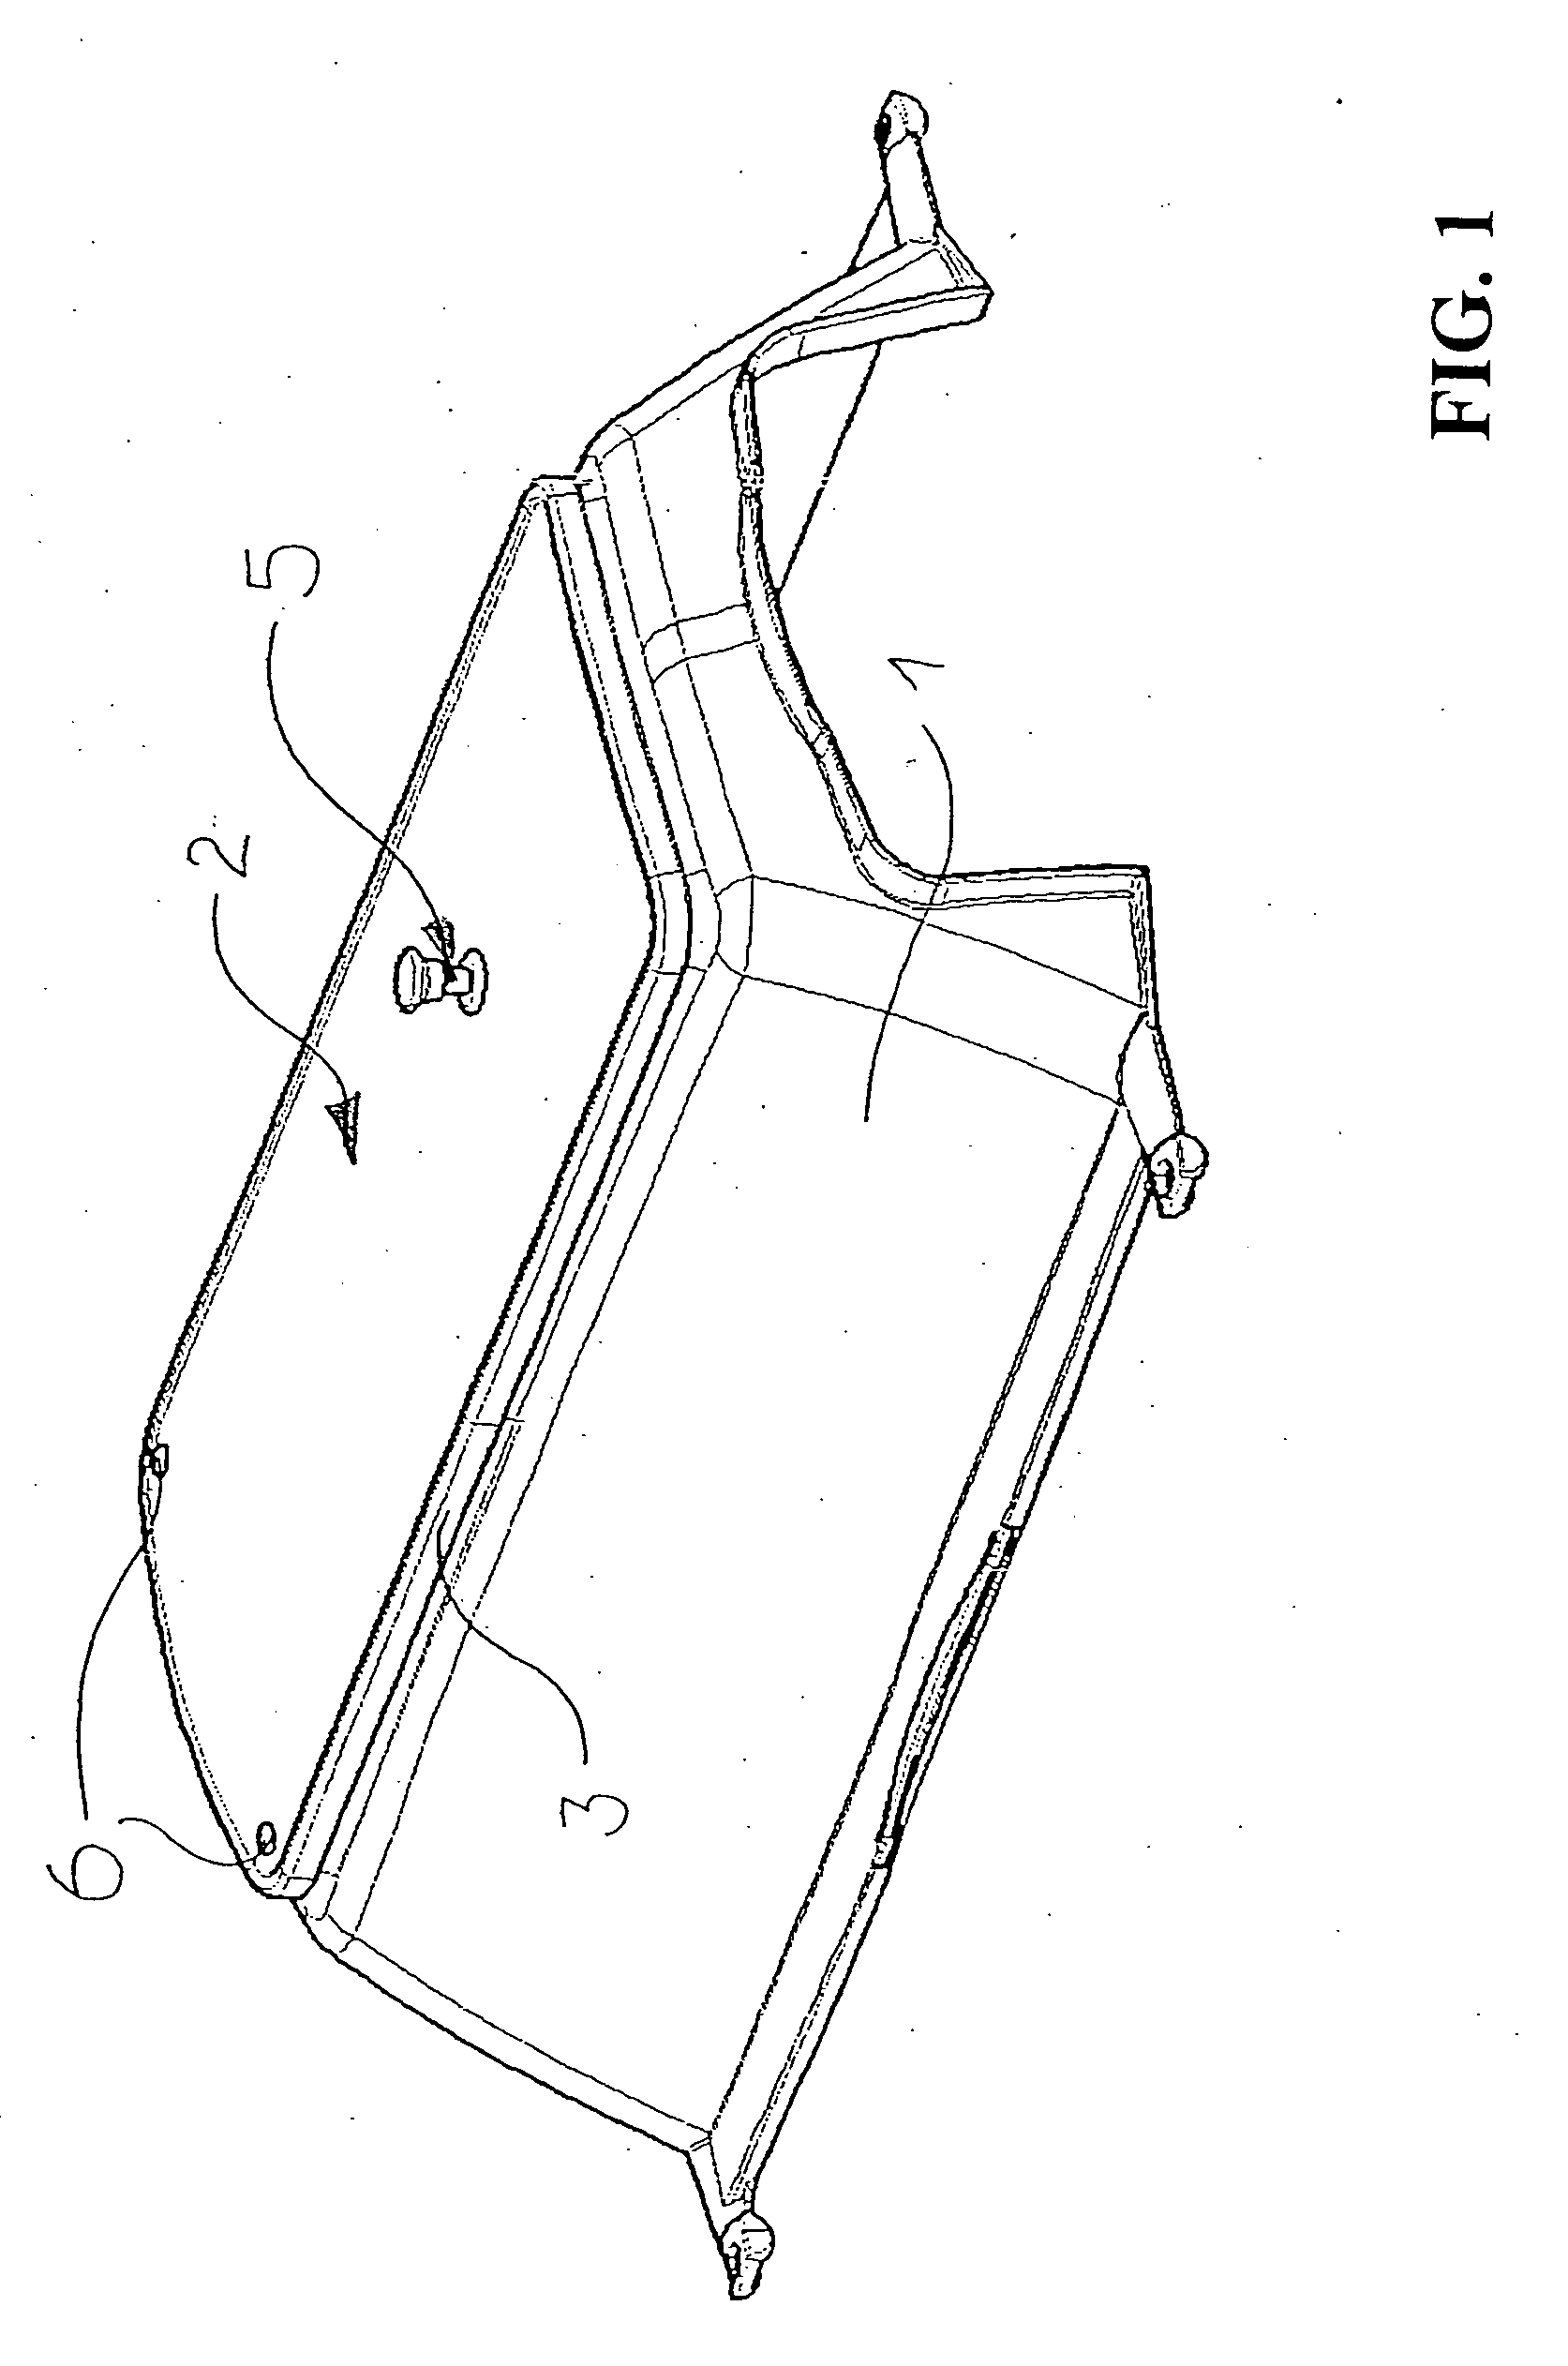 Hood with a double wall for a thermotherapy device